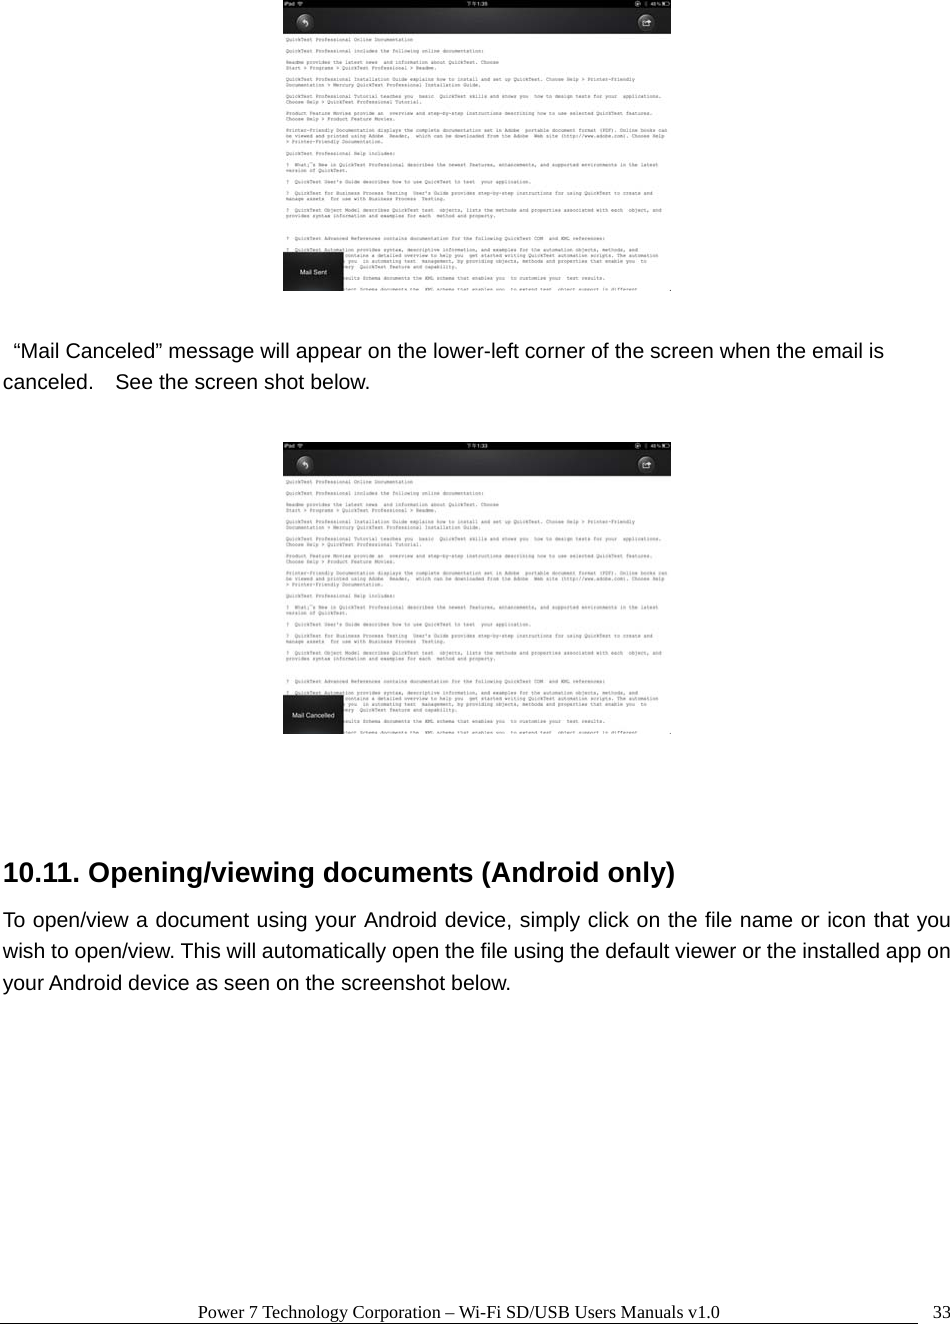 Power 7 Technology Corporation – Wi-Fi SD/USB Users Manuals v1.0  33    “Mail Canceled” message will appear on the lower-left corner of the screen when the email is canceled.    See the screen shot below.     10.11. Opening/viewing documents (Android only) To open/view a document using your Android device, simply click on the file name or icon that you wish to open/view. This will automatically open the file using the default viewer or the installed app on your Android device as seen on the screenshot below.  